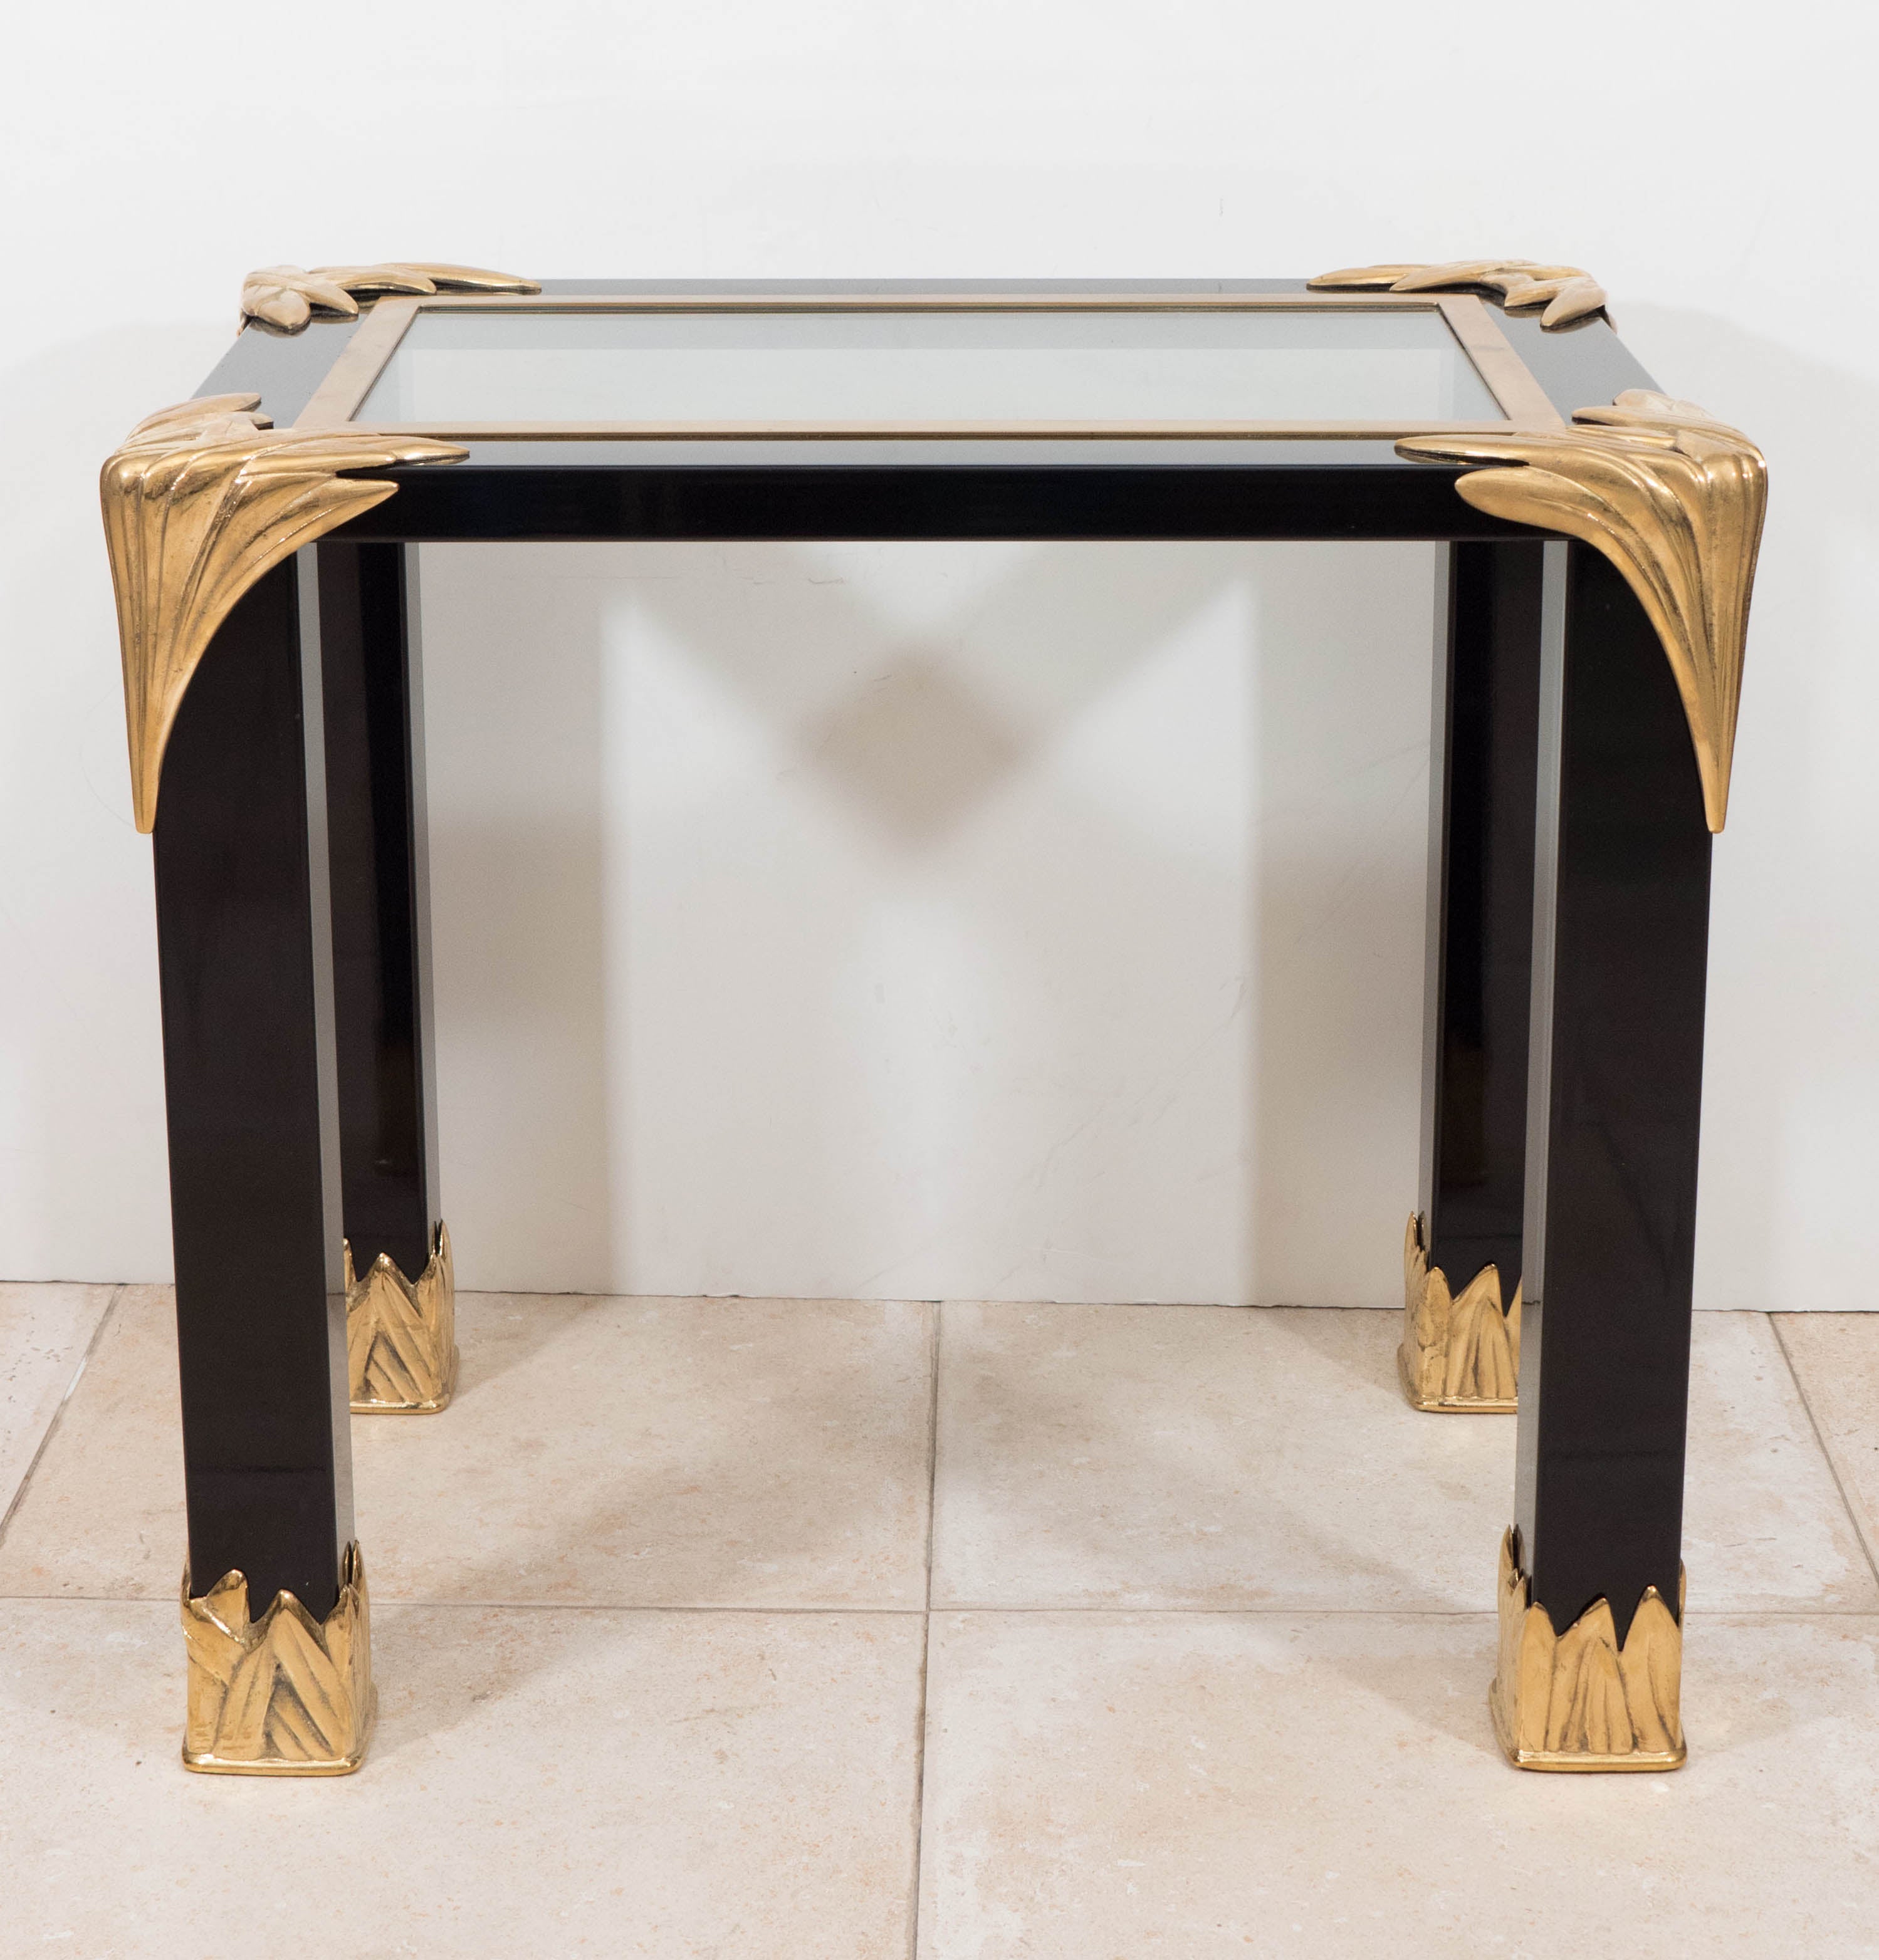 Pair of black lacquered wood and glass side tables with decorative brass feather details.